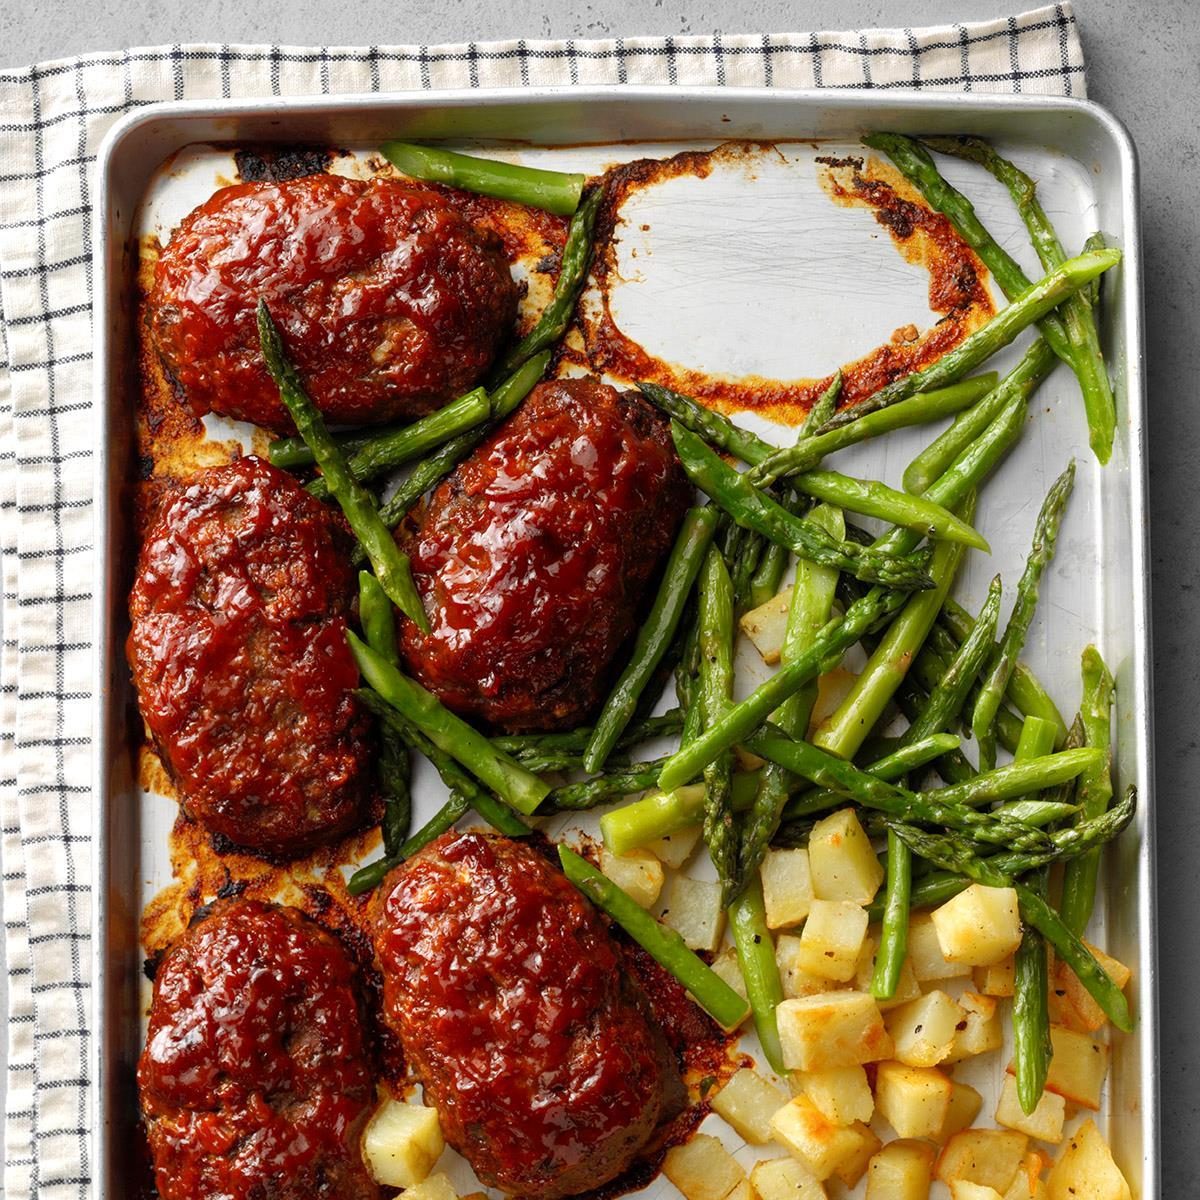 10 Healthy Sheet Pan Meals To Try For Easy Dinners and Lunches